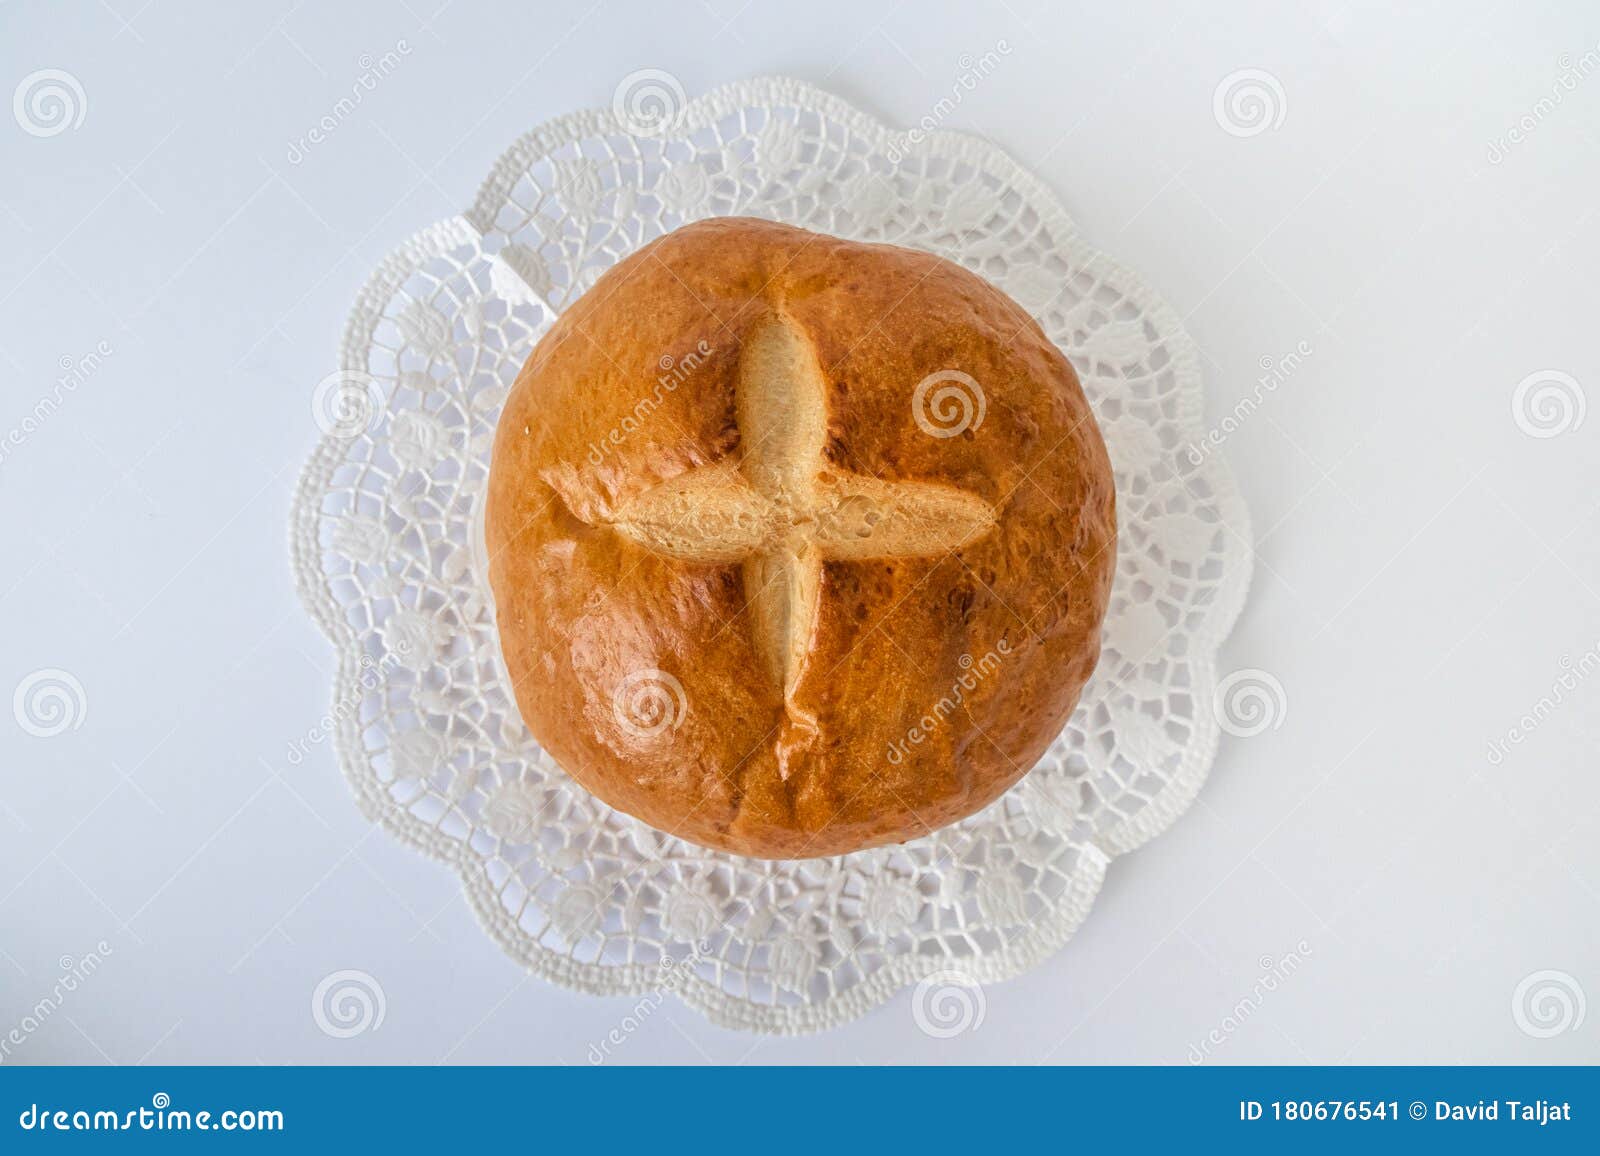 Easter bread with a cross stock image. Image of christian - 180676541